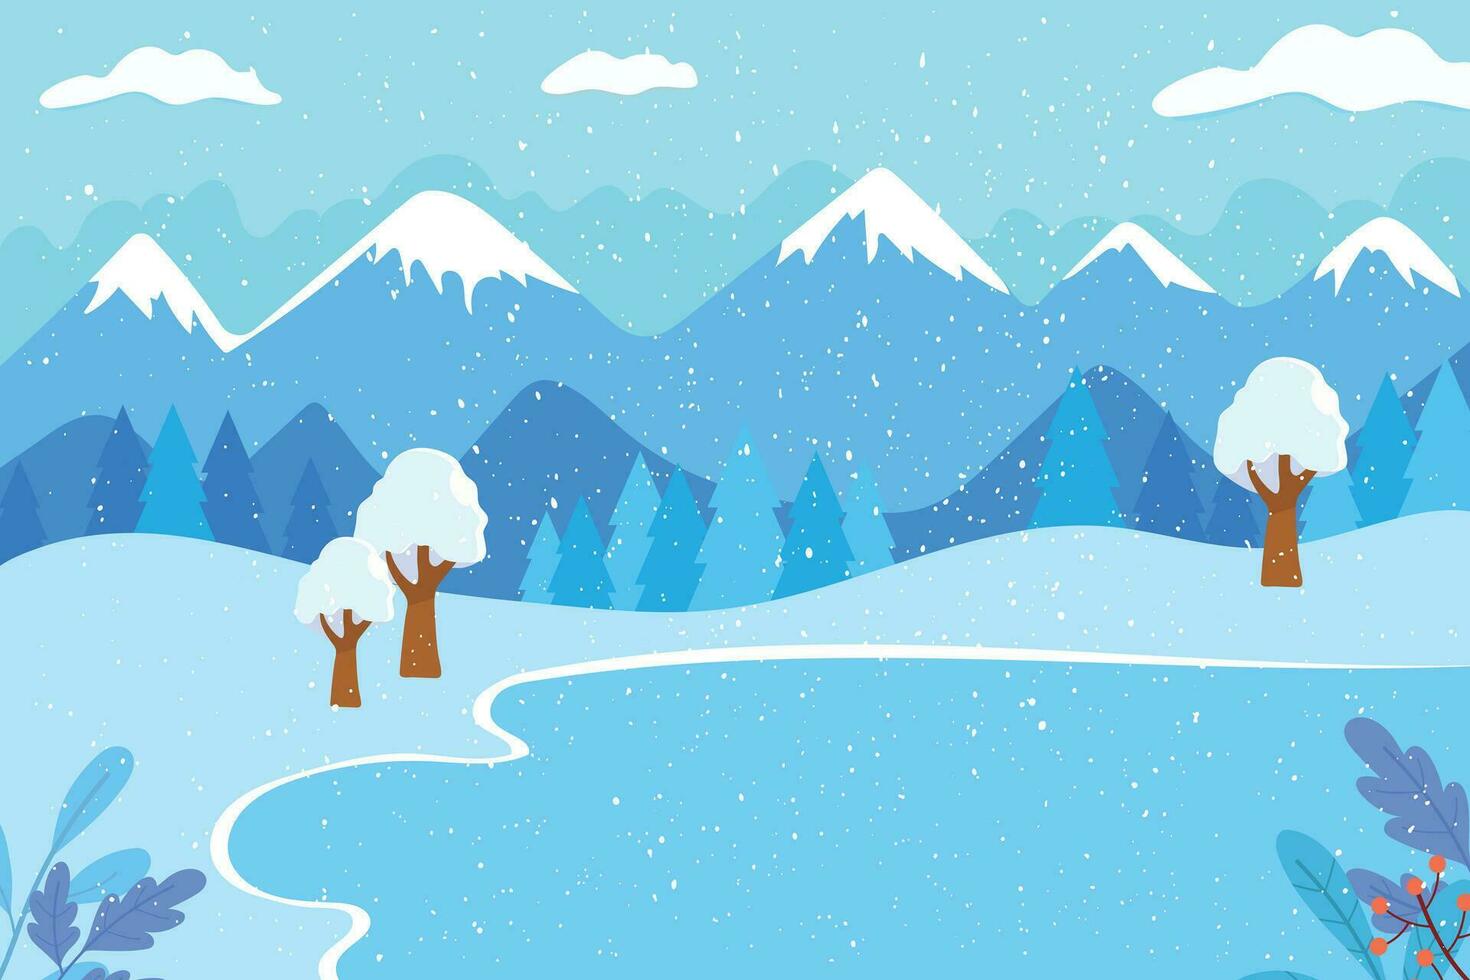 Winter morning. Winter landscape with mountains, lake, trees and fir trees. Vector winter illustration.